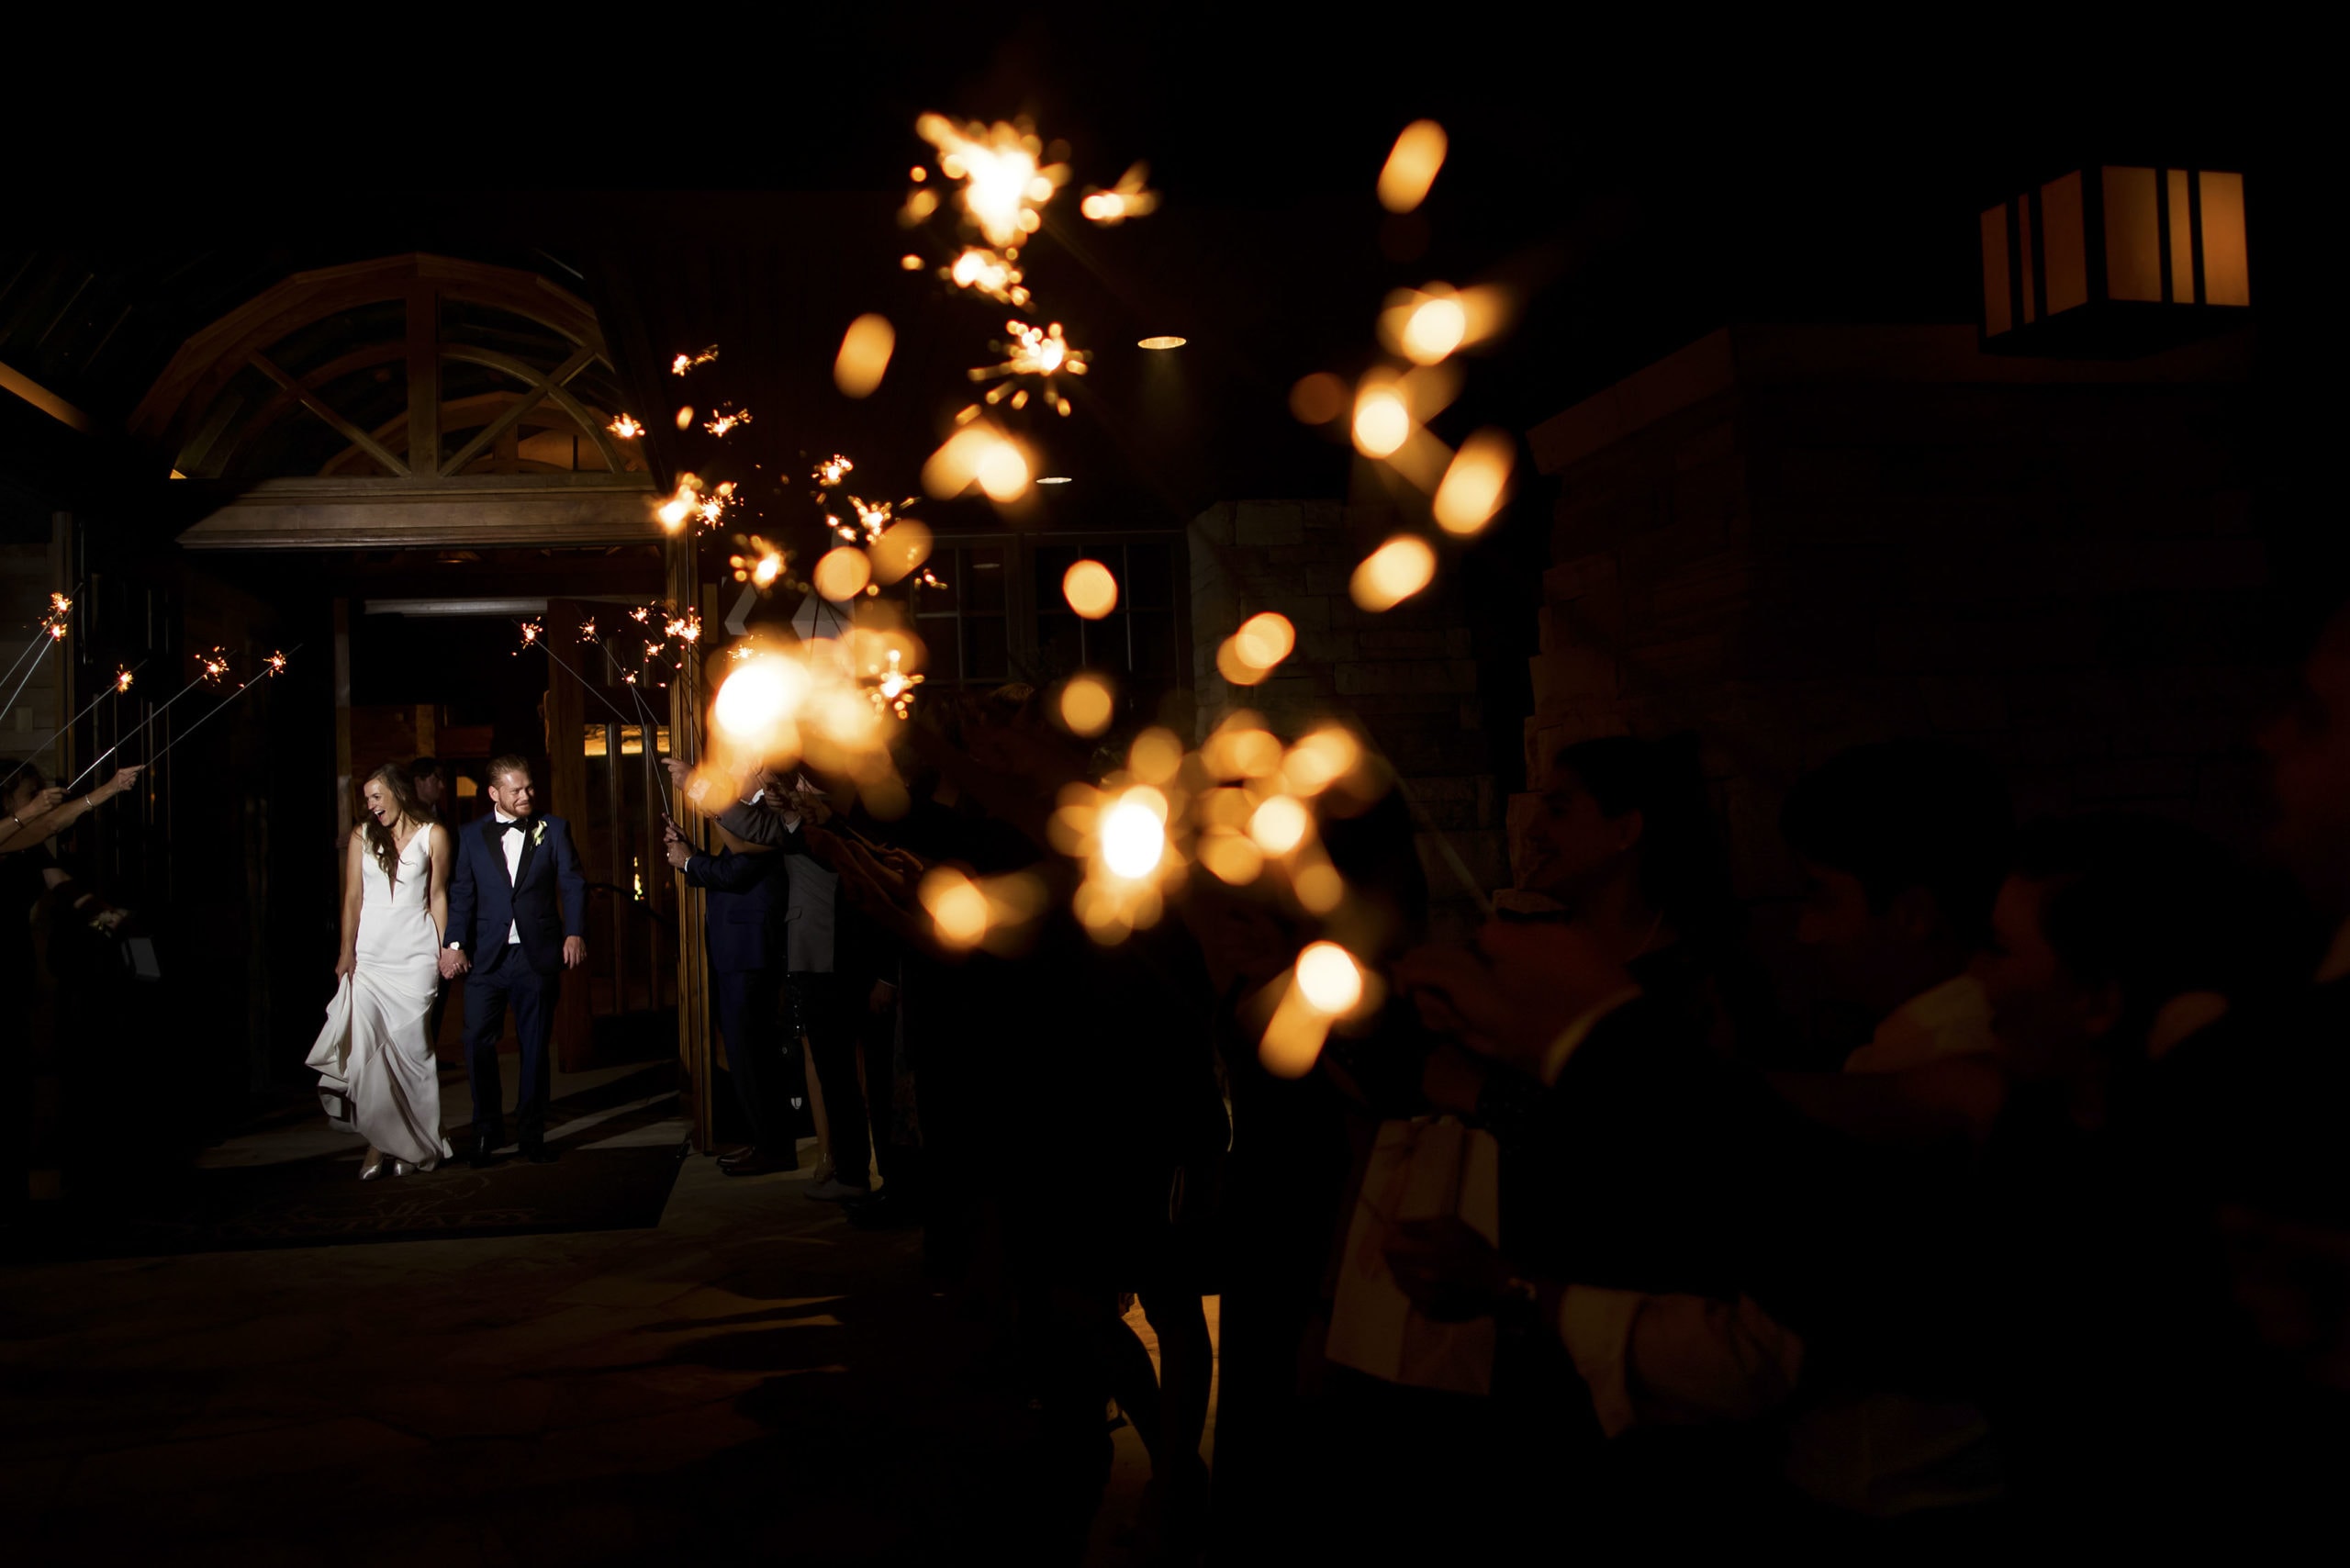 The bride and groom leave their wedding reception through a tunnel of sparklers at Sanctuary